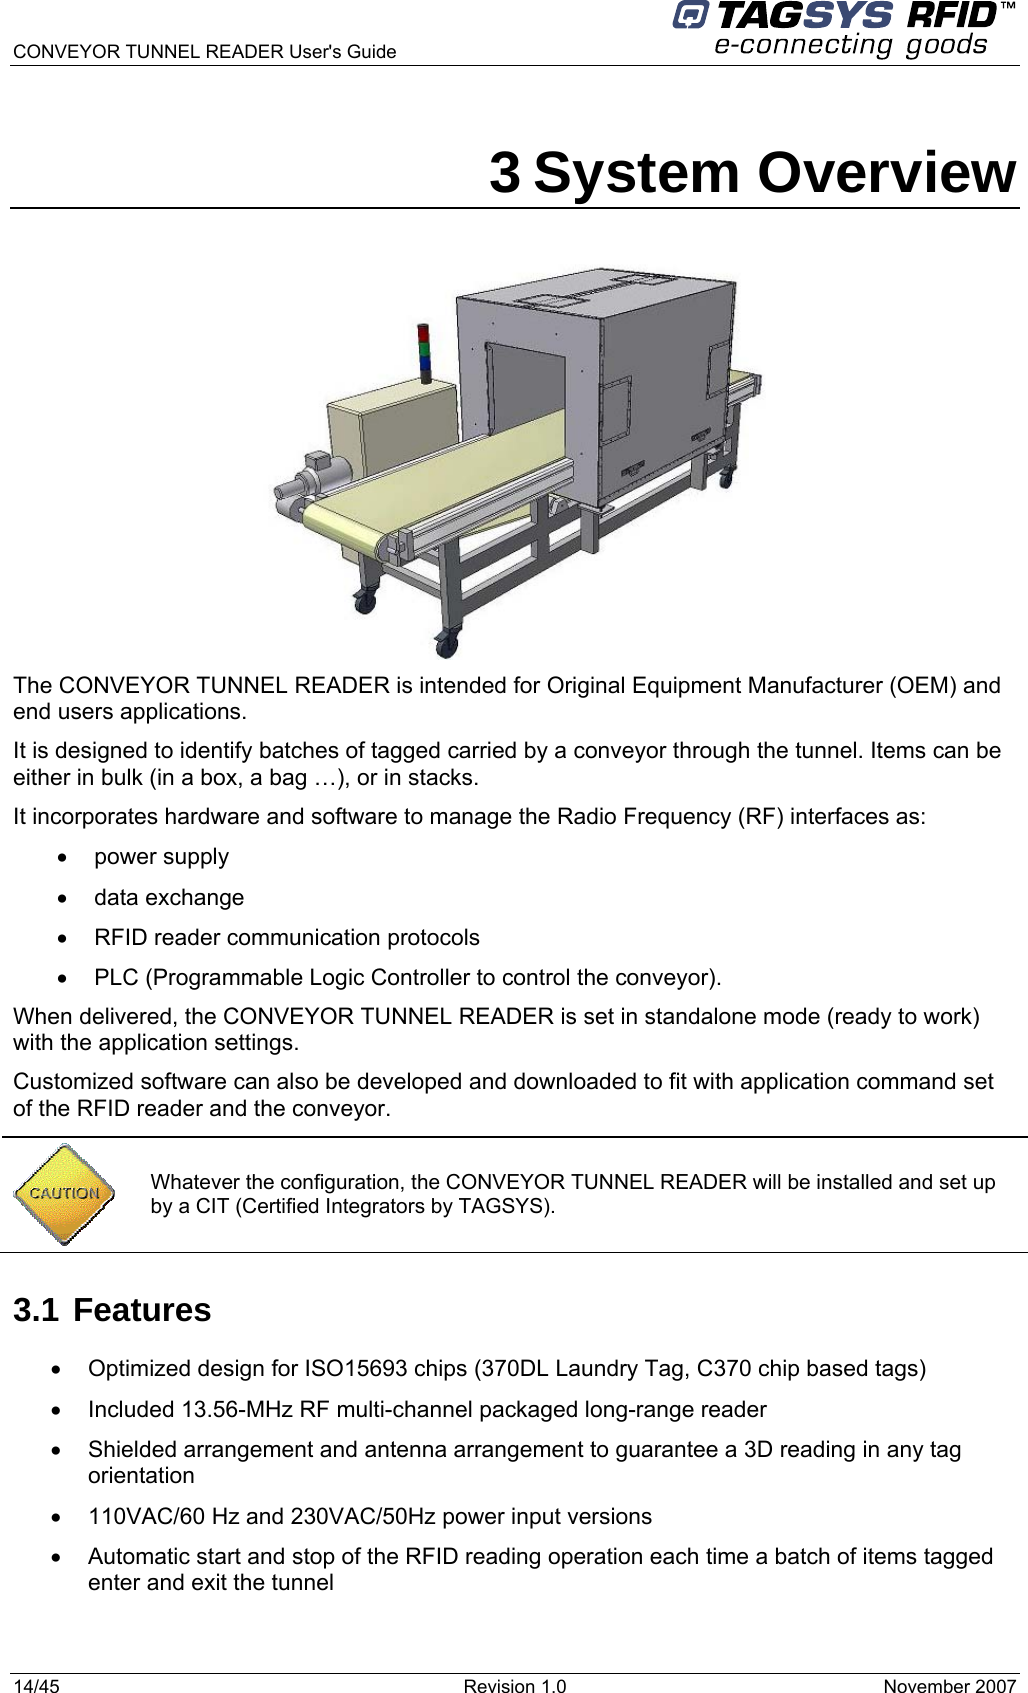  CONVEYOR TUNNEL READER User&apos;s Guide 14/45  Revision 1.0  November 2007  3 System Overview  The CONVEYOR TUNNEL READER is intended for Original Equipment Manufacturer (OEM) and end users applications.  It is designed to identify batches of tagged carried by a conveyor through the tunnel. Items can be either in bulk (in a box, a bag …), or in stacks. It incorporates hardware and software to manage the Radio Frequency (RF) interfaces as: • power supply • data exchange •  RFID reader communication protocols •  PLC (Programmable Logic Controller to control the conveyor). When delivered, the CONVEYOR TUNNEL READER is set in standalone mode (ready to work) with the application settings. Customized software can also be developed and downloaded to fit with application command set of the RFID reader and the conveyor.  3.1 Features •  Optimized design for ISO15693 chips (370DL Laundry Tag, C370 chip based tags) •  Included 13.56-MHz RF multi-channel packaged long-range reader •  Shielded arrangement and antenna arrangement to guarantee a 3D reading in any tag orientation •  110VAC/60 Hz and 230VAC/50Hz power input versions •  Automatic start and stop of the RFID reading operation each time a batch of items tagged enter and exit the tunnel   Whatever the configuration, the CONVEYOR TUNNEL READER will be installed and set up by a CIT (Certified Integrators by TAGSYS). 